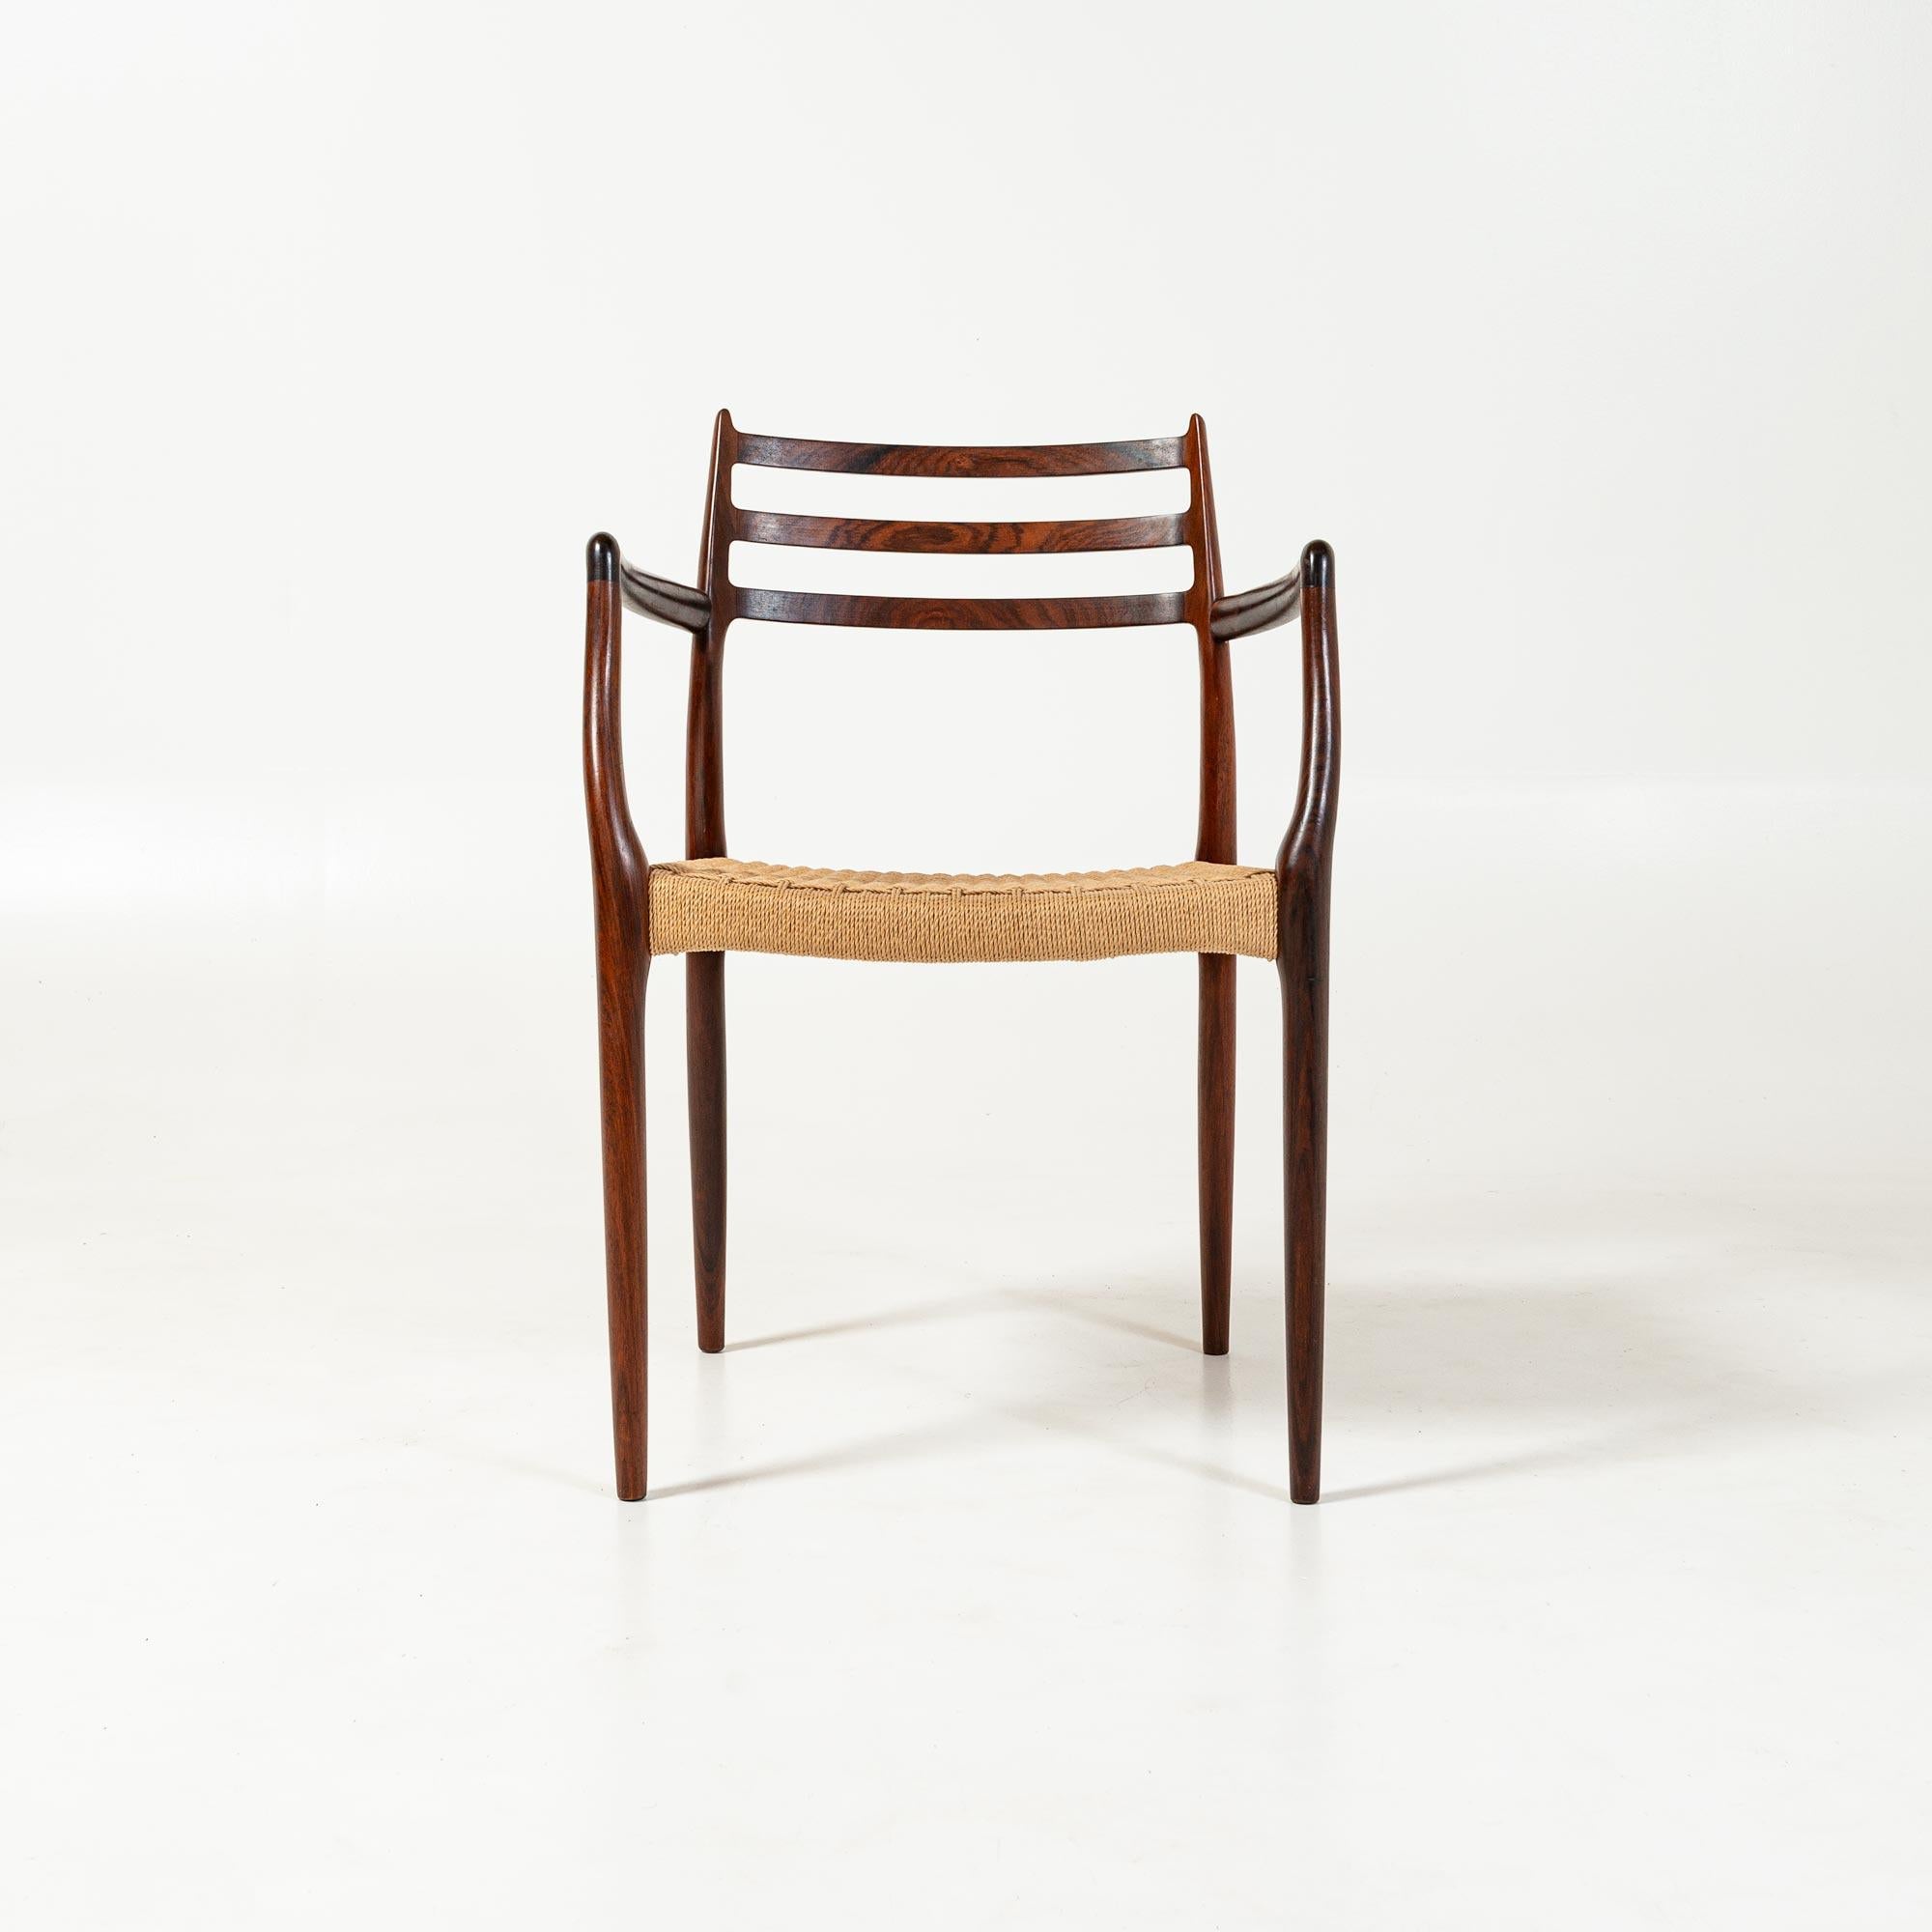 Possibly the most sought after and rare Moller chair, especially in rosewood, This armchair model 62 designed by Niels Otto Møller. Produced by J.L Møllers møbelfabrik in Denmark is in excellent condition, with minimal wears considering it's age.